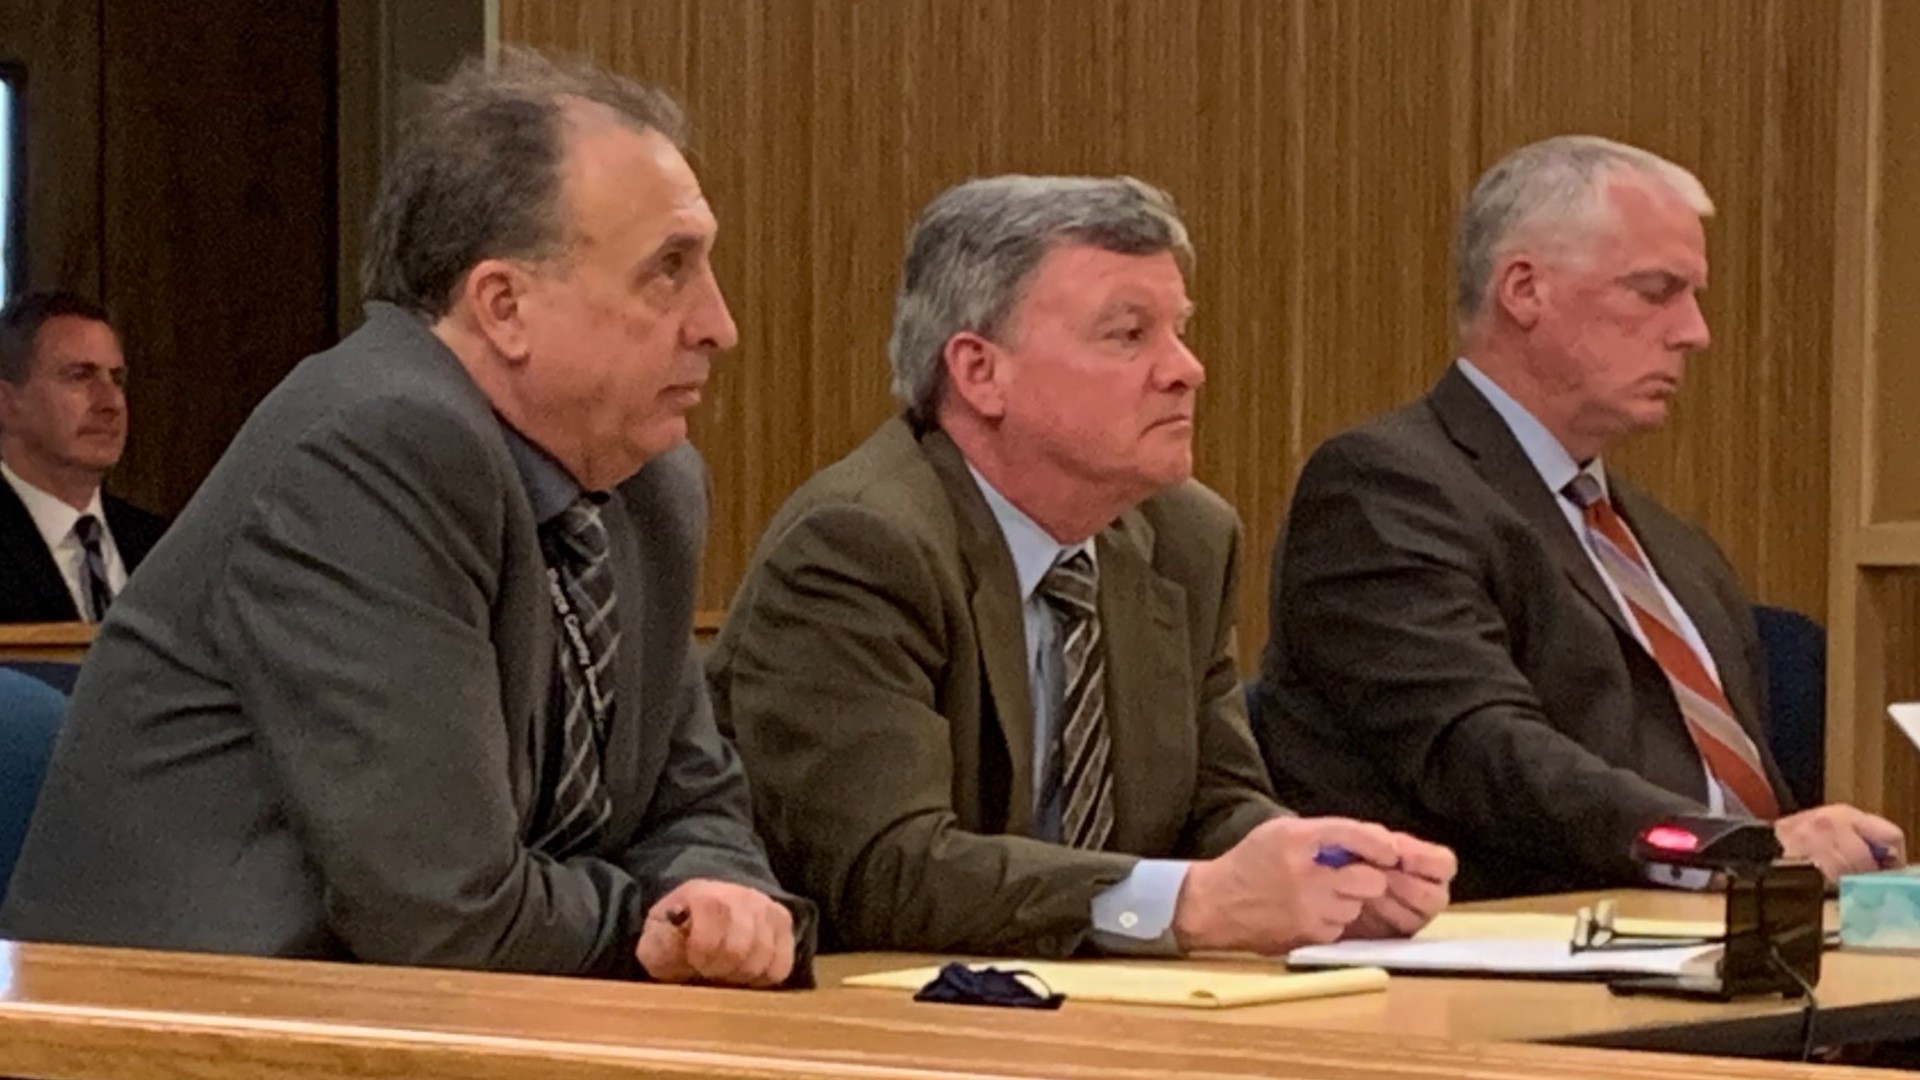 The prosecution and defense made opening statements on Nov. 30 following jury selection in the criminal trial of Ed Troyer.